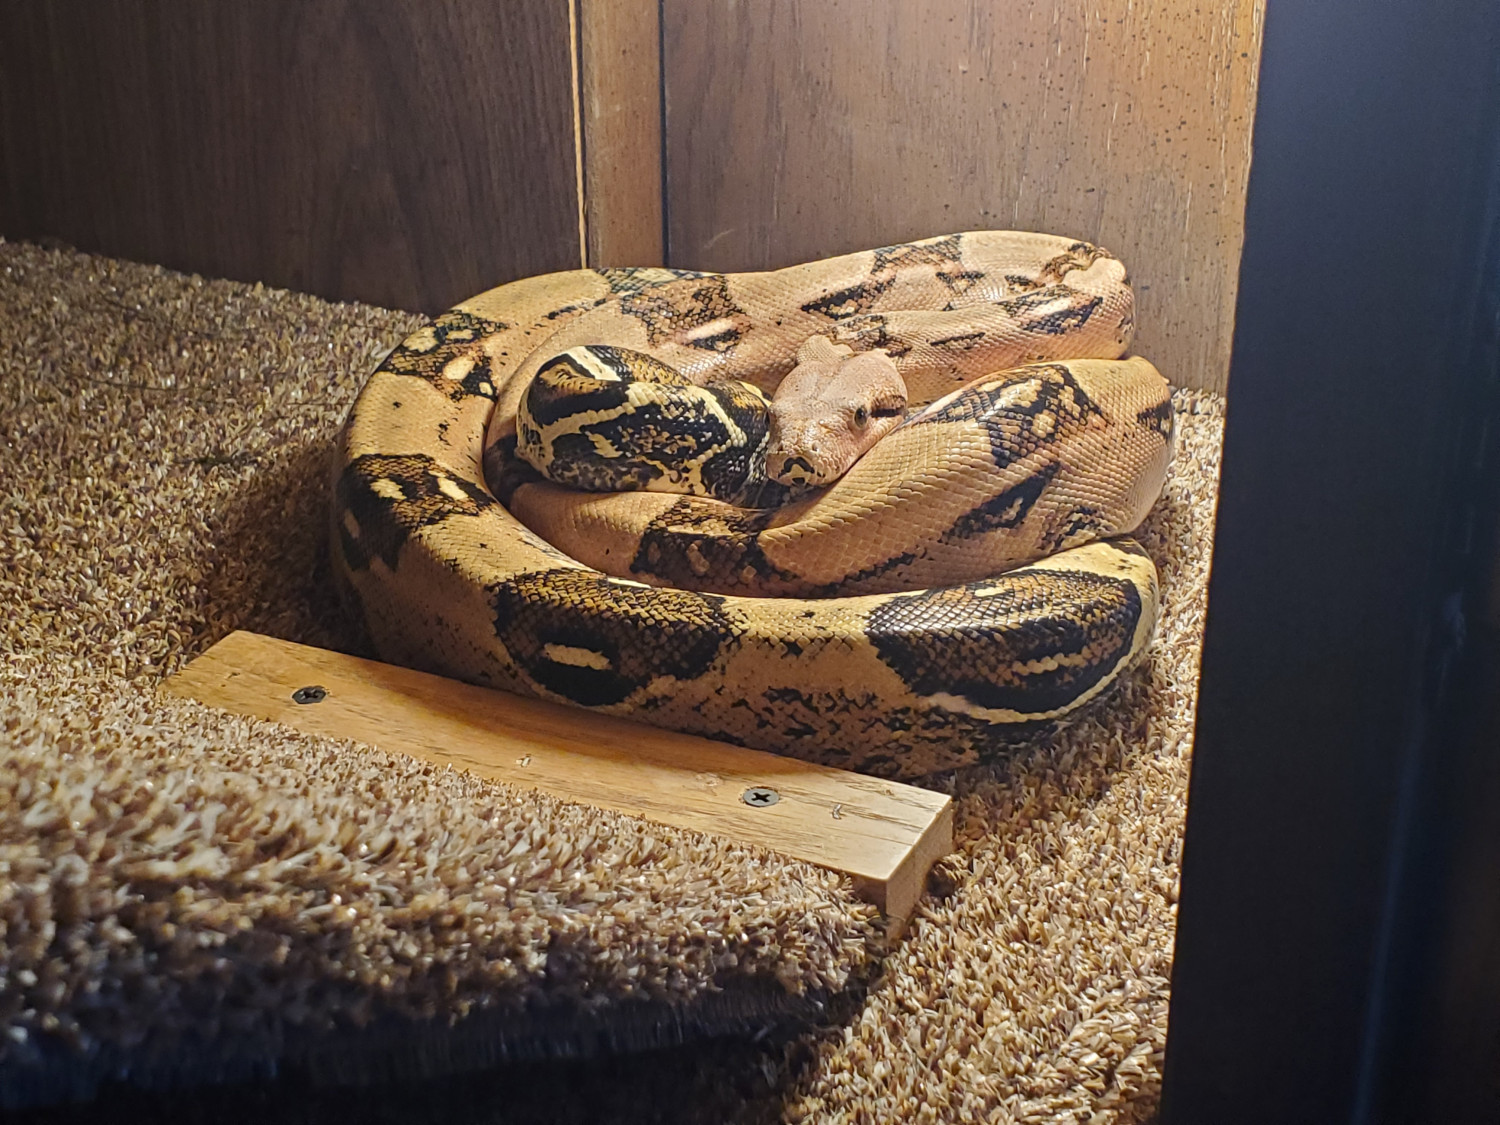 Boa Constrictor Reptiles For Sale Ridgefield Wa 304369,Cats In Heat Meaning